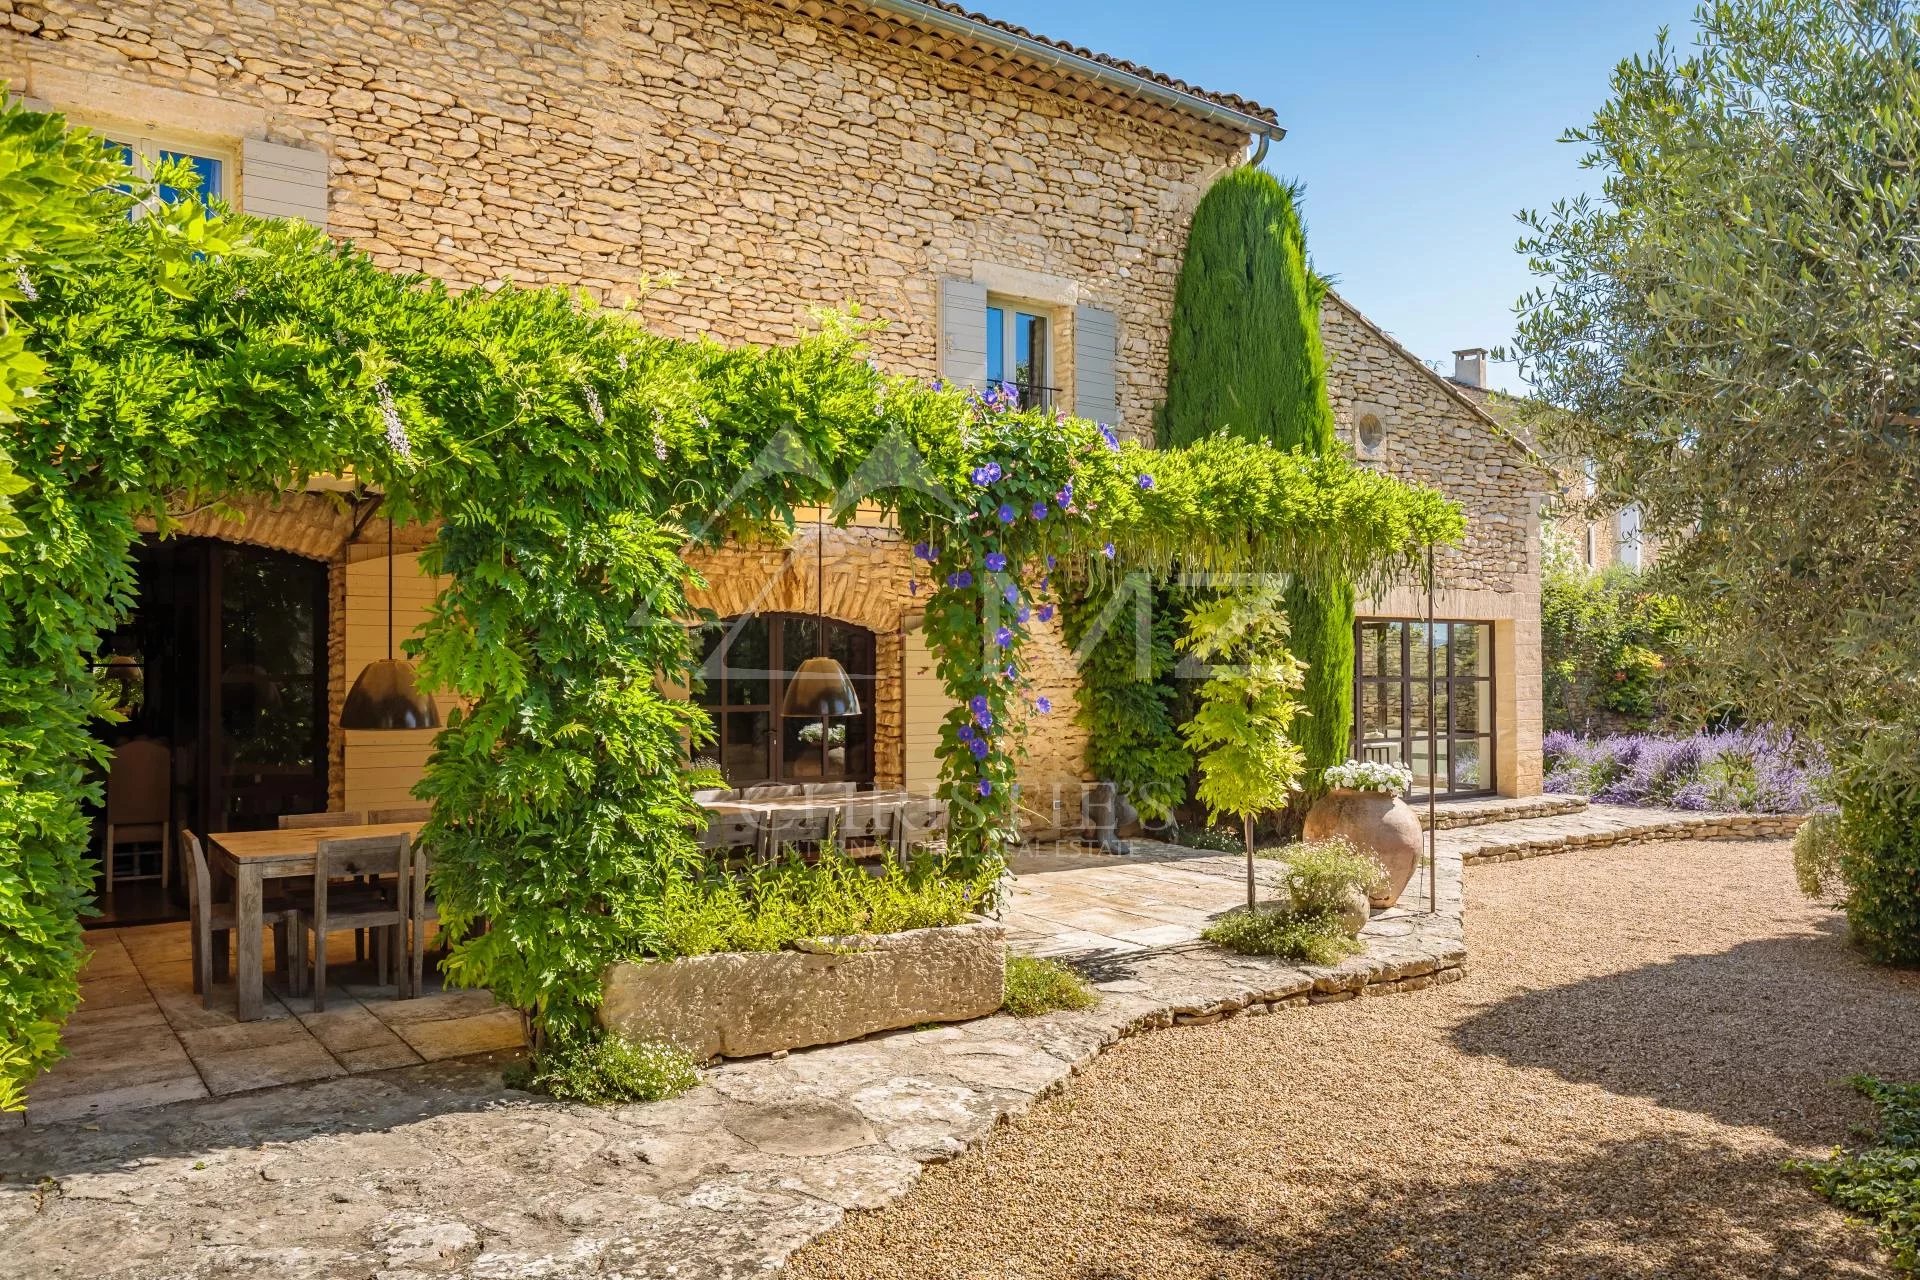 Close to Gordes - Charming house in the village